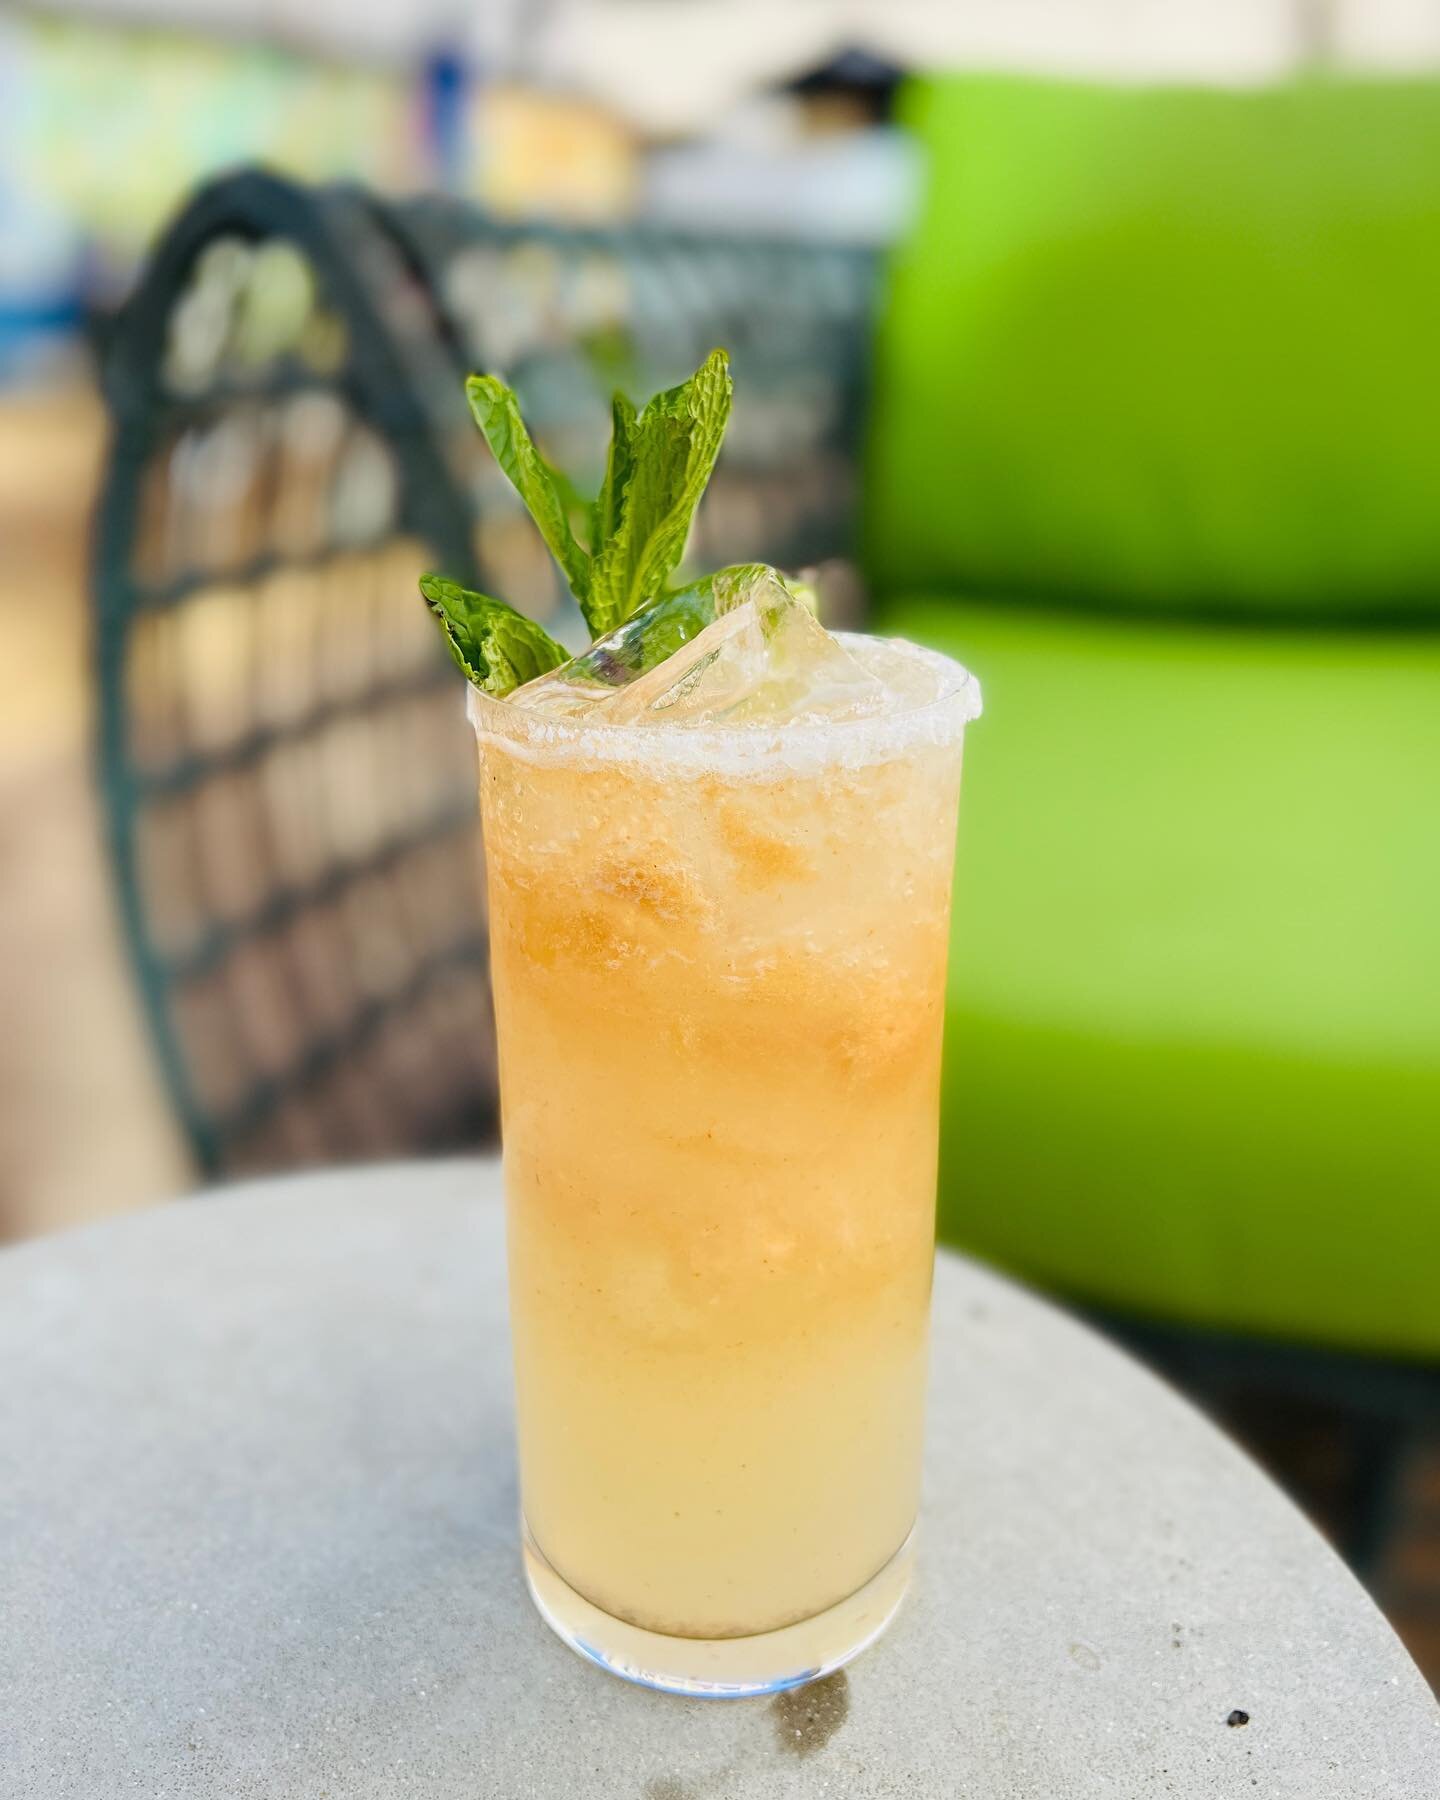 Need seasonal menu changes coming soon!
New wine, beers on tap and cocktails to enjoy. 
Meanwhile, look at Adios 😍.
A twist on a Paloma with hints of spiciness and tamarind. 😋